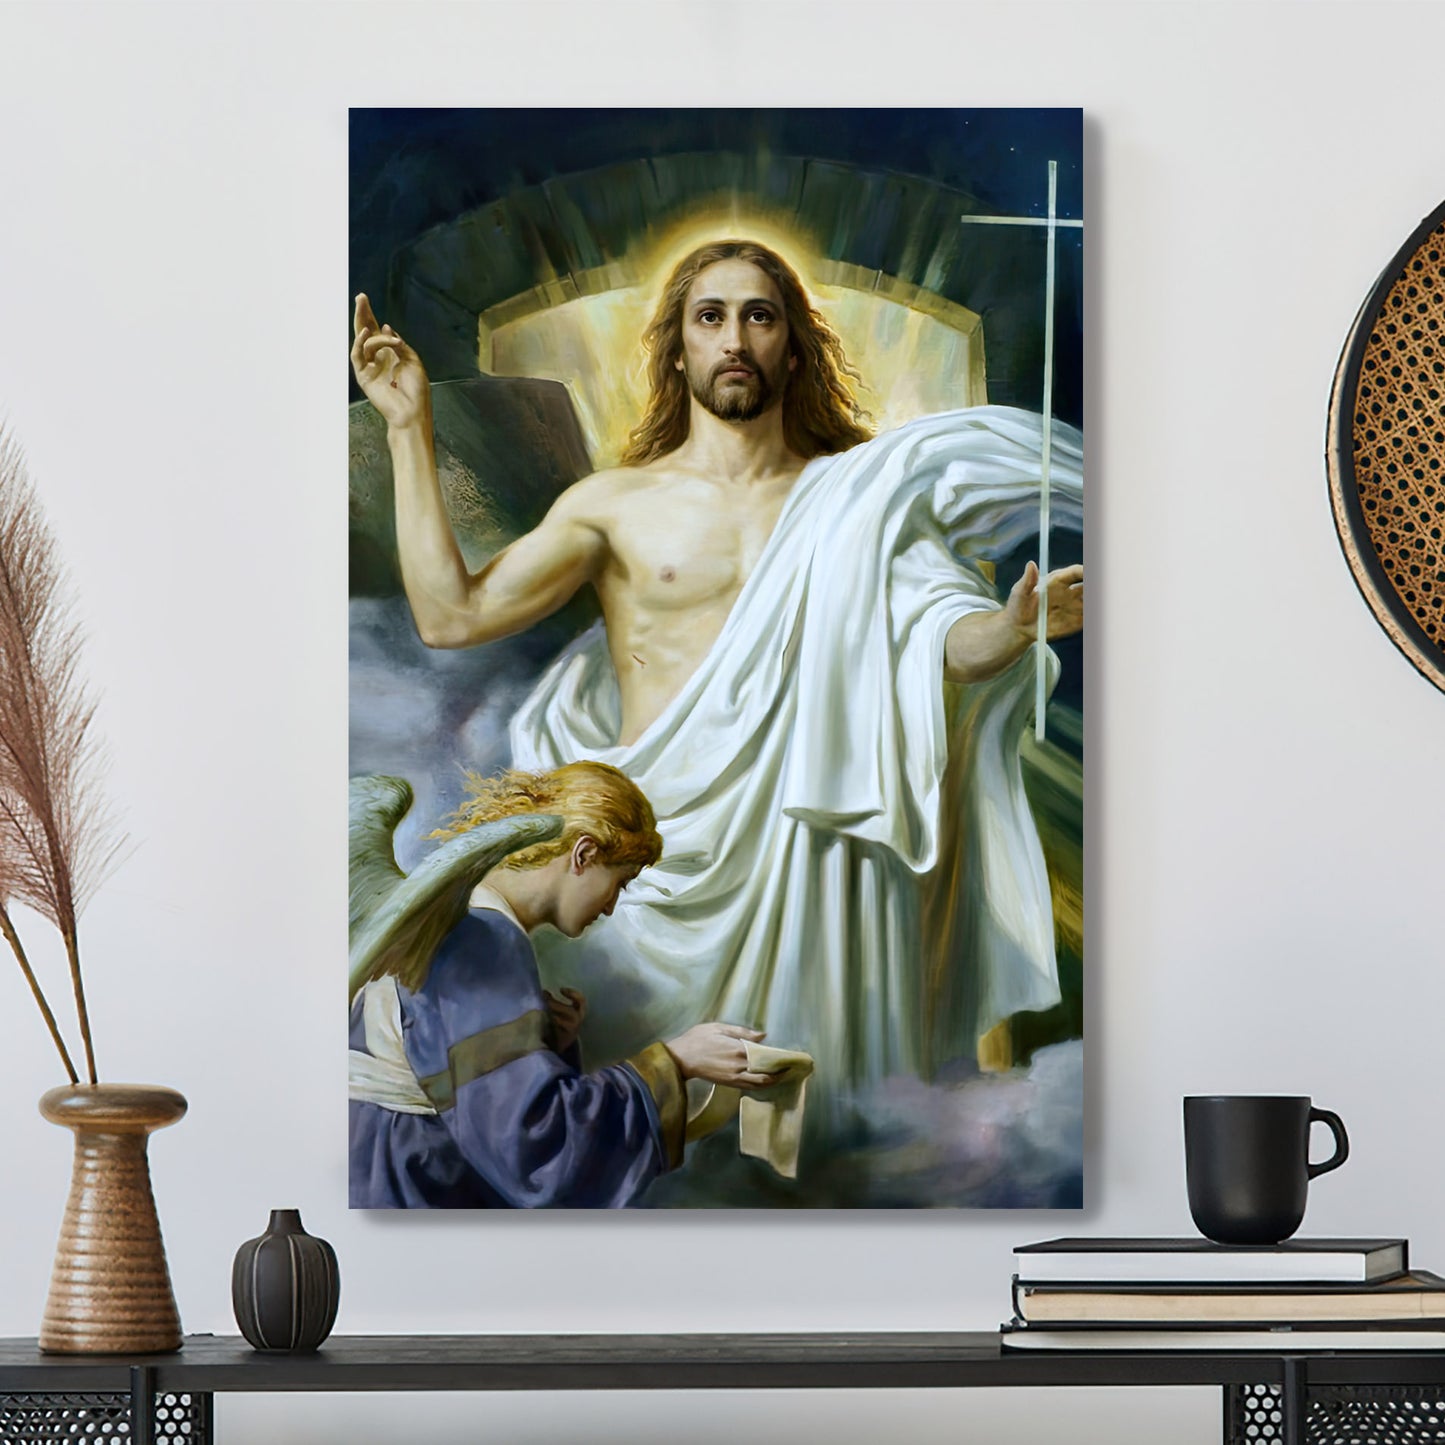 Christ's Victory Over The Grave Painting - Christian Wall Art - Christ Pictures - Christian Canvas Prints - Religious Wall Art Canvas - Ciaocustom